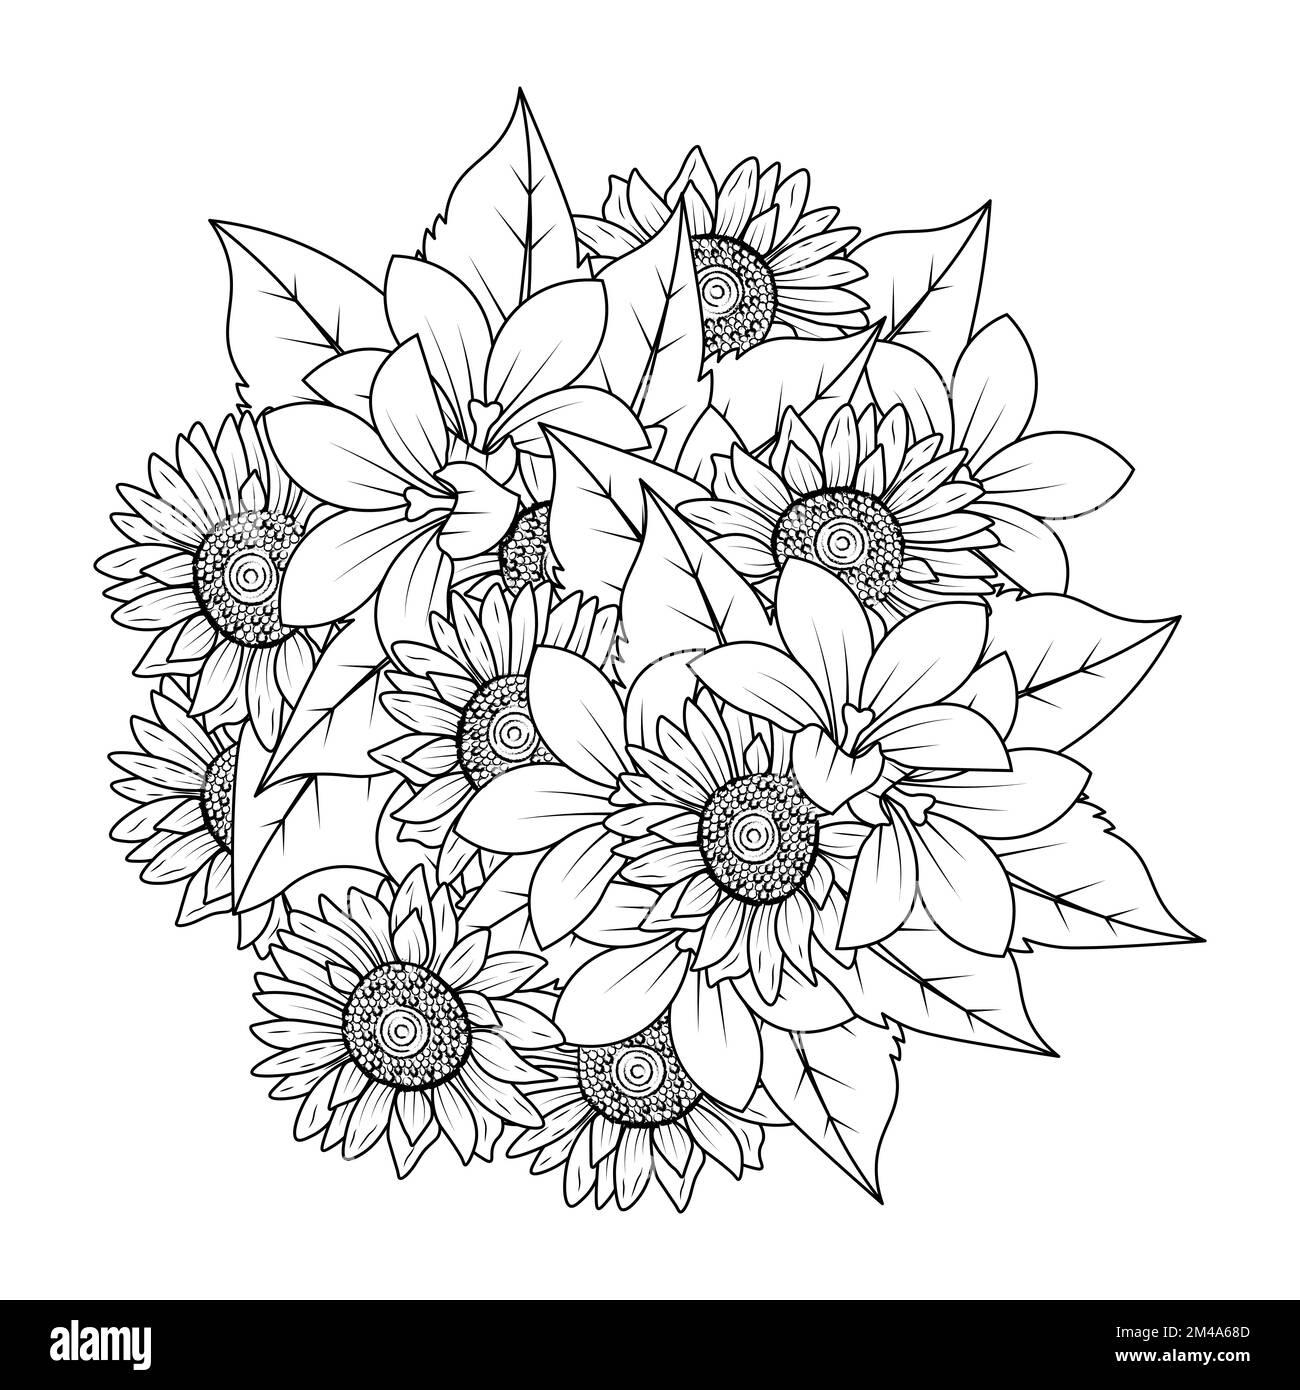 Sunflower Sketch Vector Images (over 3,400)